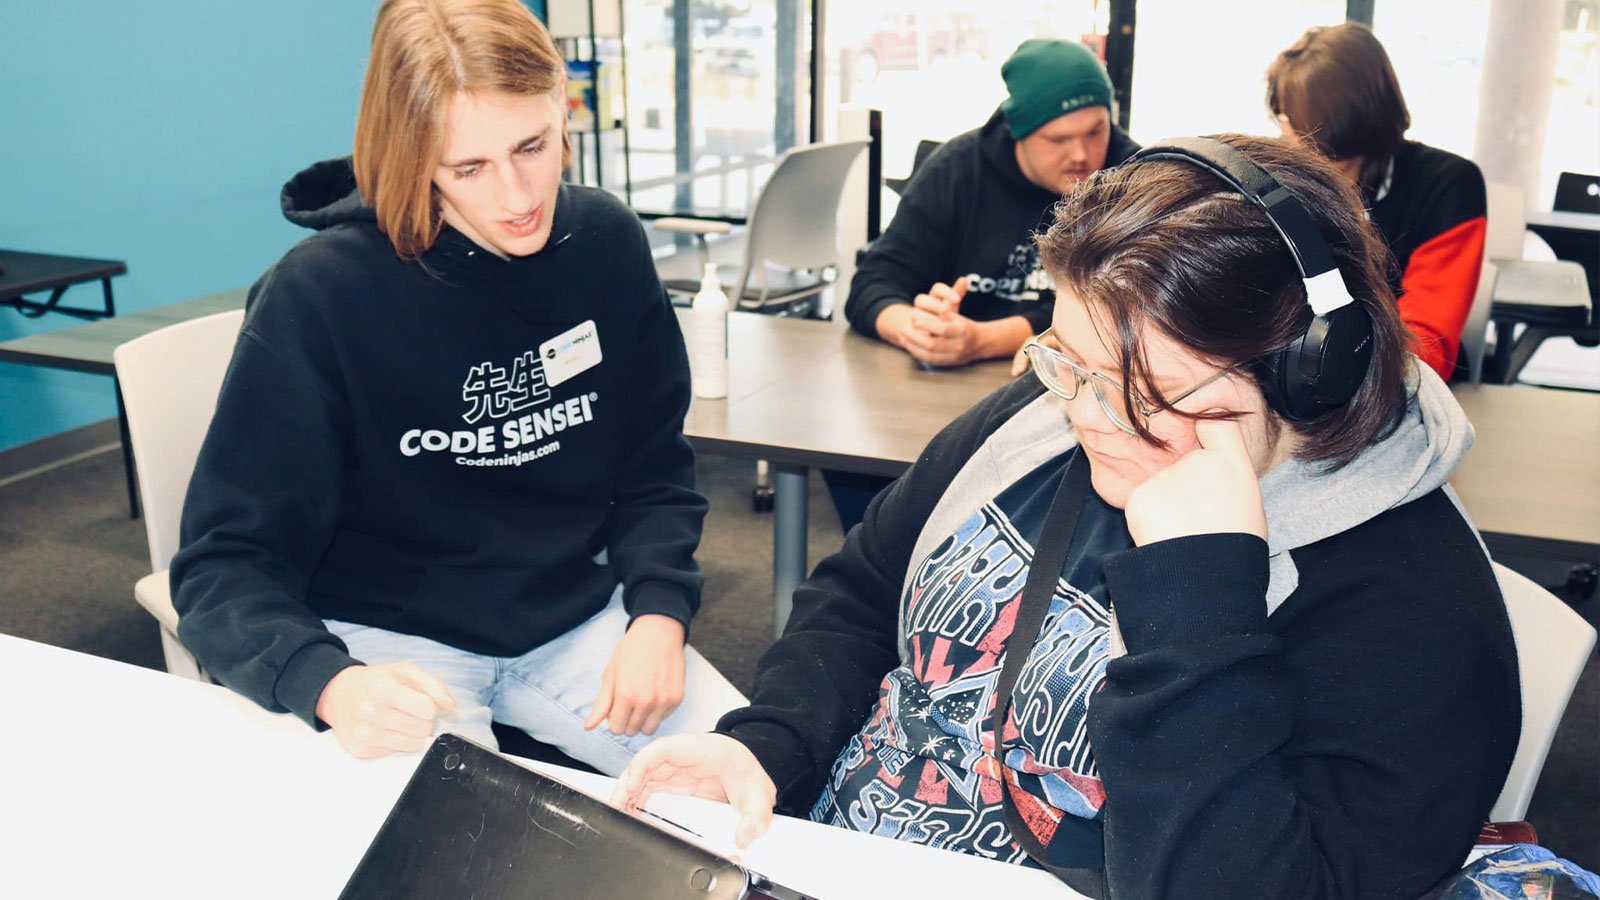 'Hour of Code': Inspiring Tech Careers at Acceleration Academies image